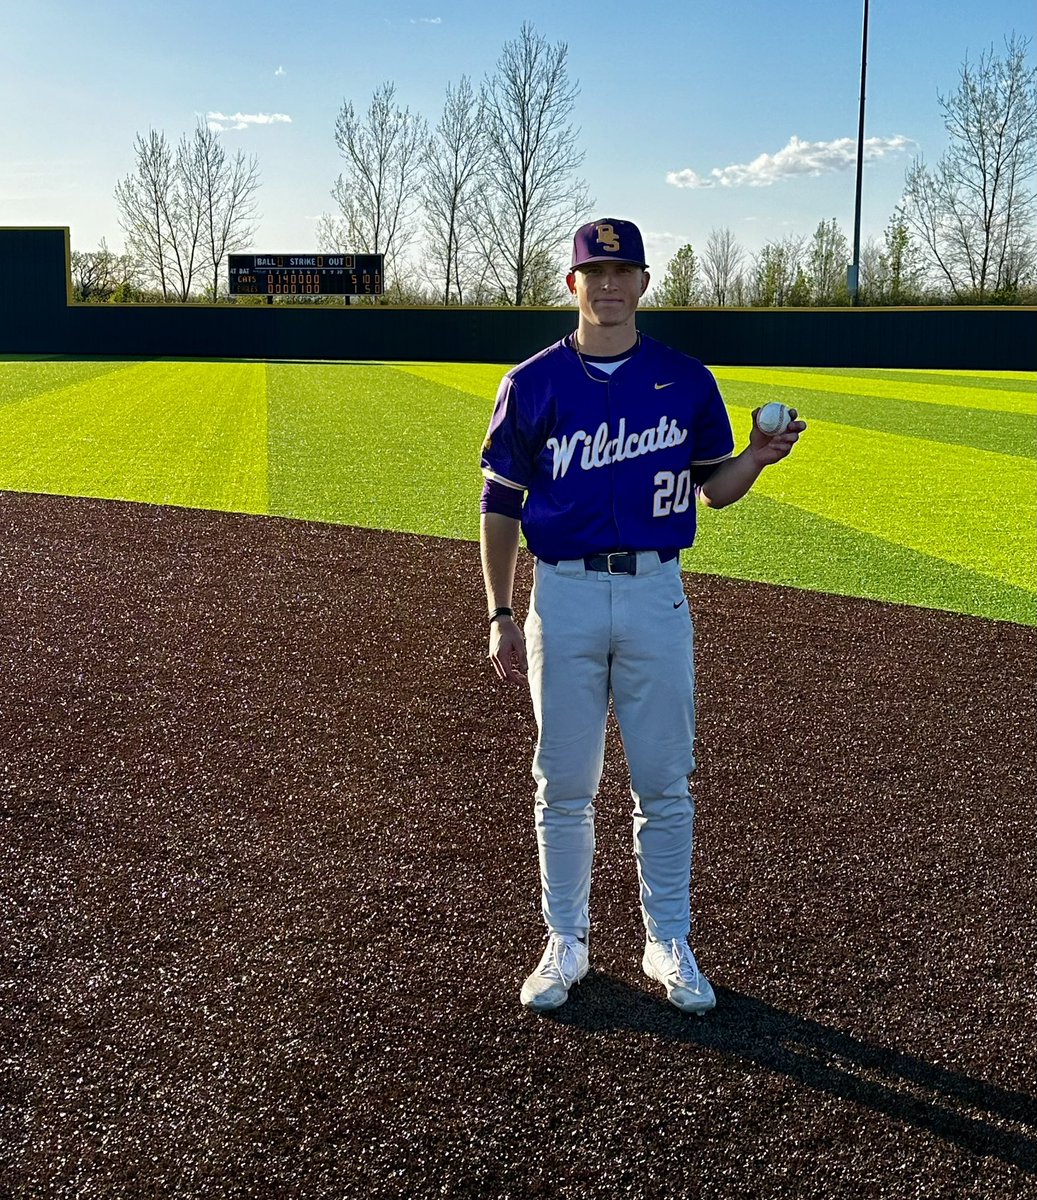 Some individual highlights from today’s win: - Cole Gibler: 7 IP, 0 ER, 10 K - Drew McConell: 3-4, 2 doubles - Ronin Vicenti: 1-4, 2B, 3 RBI Congratulations to senior Cole Gibler on breaking the school’s all-time strikeout record. With 10 K tonight, Cole now has 164 career K.